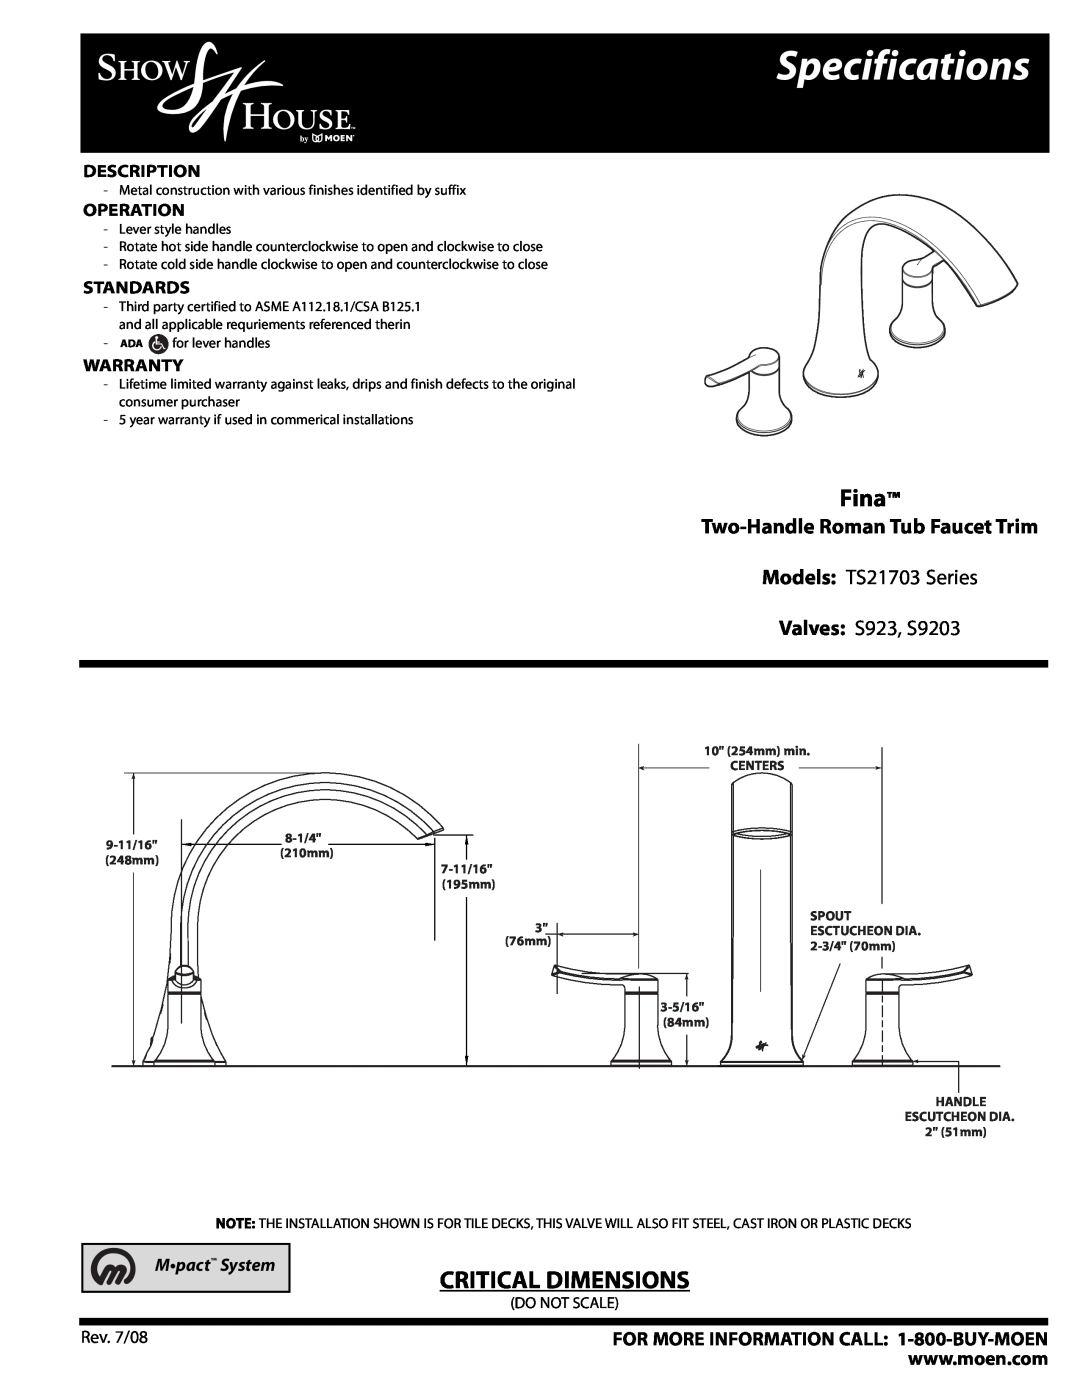 Moen TS21703 Series specifications Specifications, Fina, Critical Dimensions, Two-Handle Roman Tub Faucet Trim, Operation 